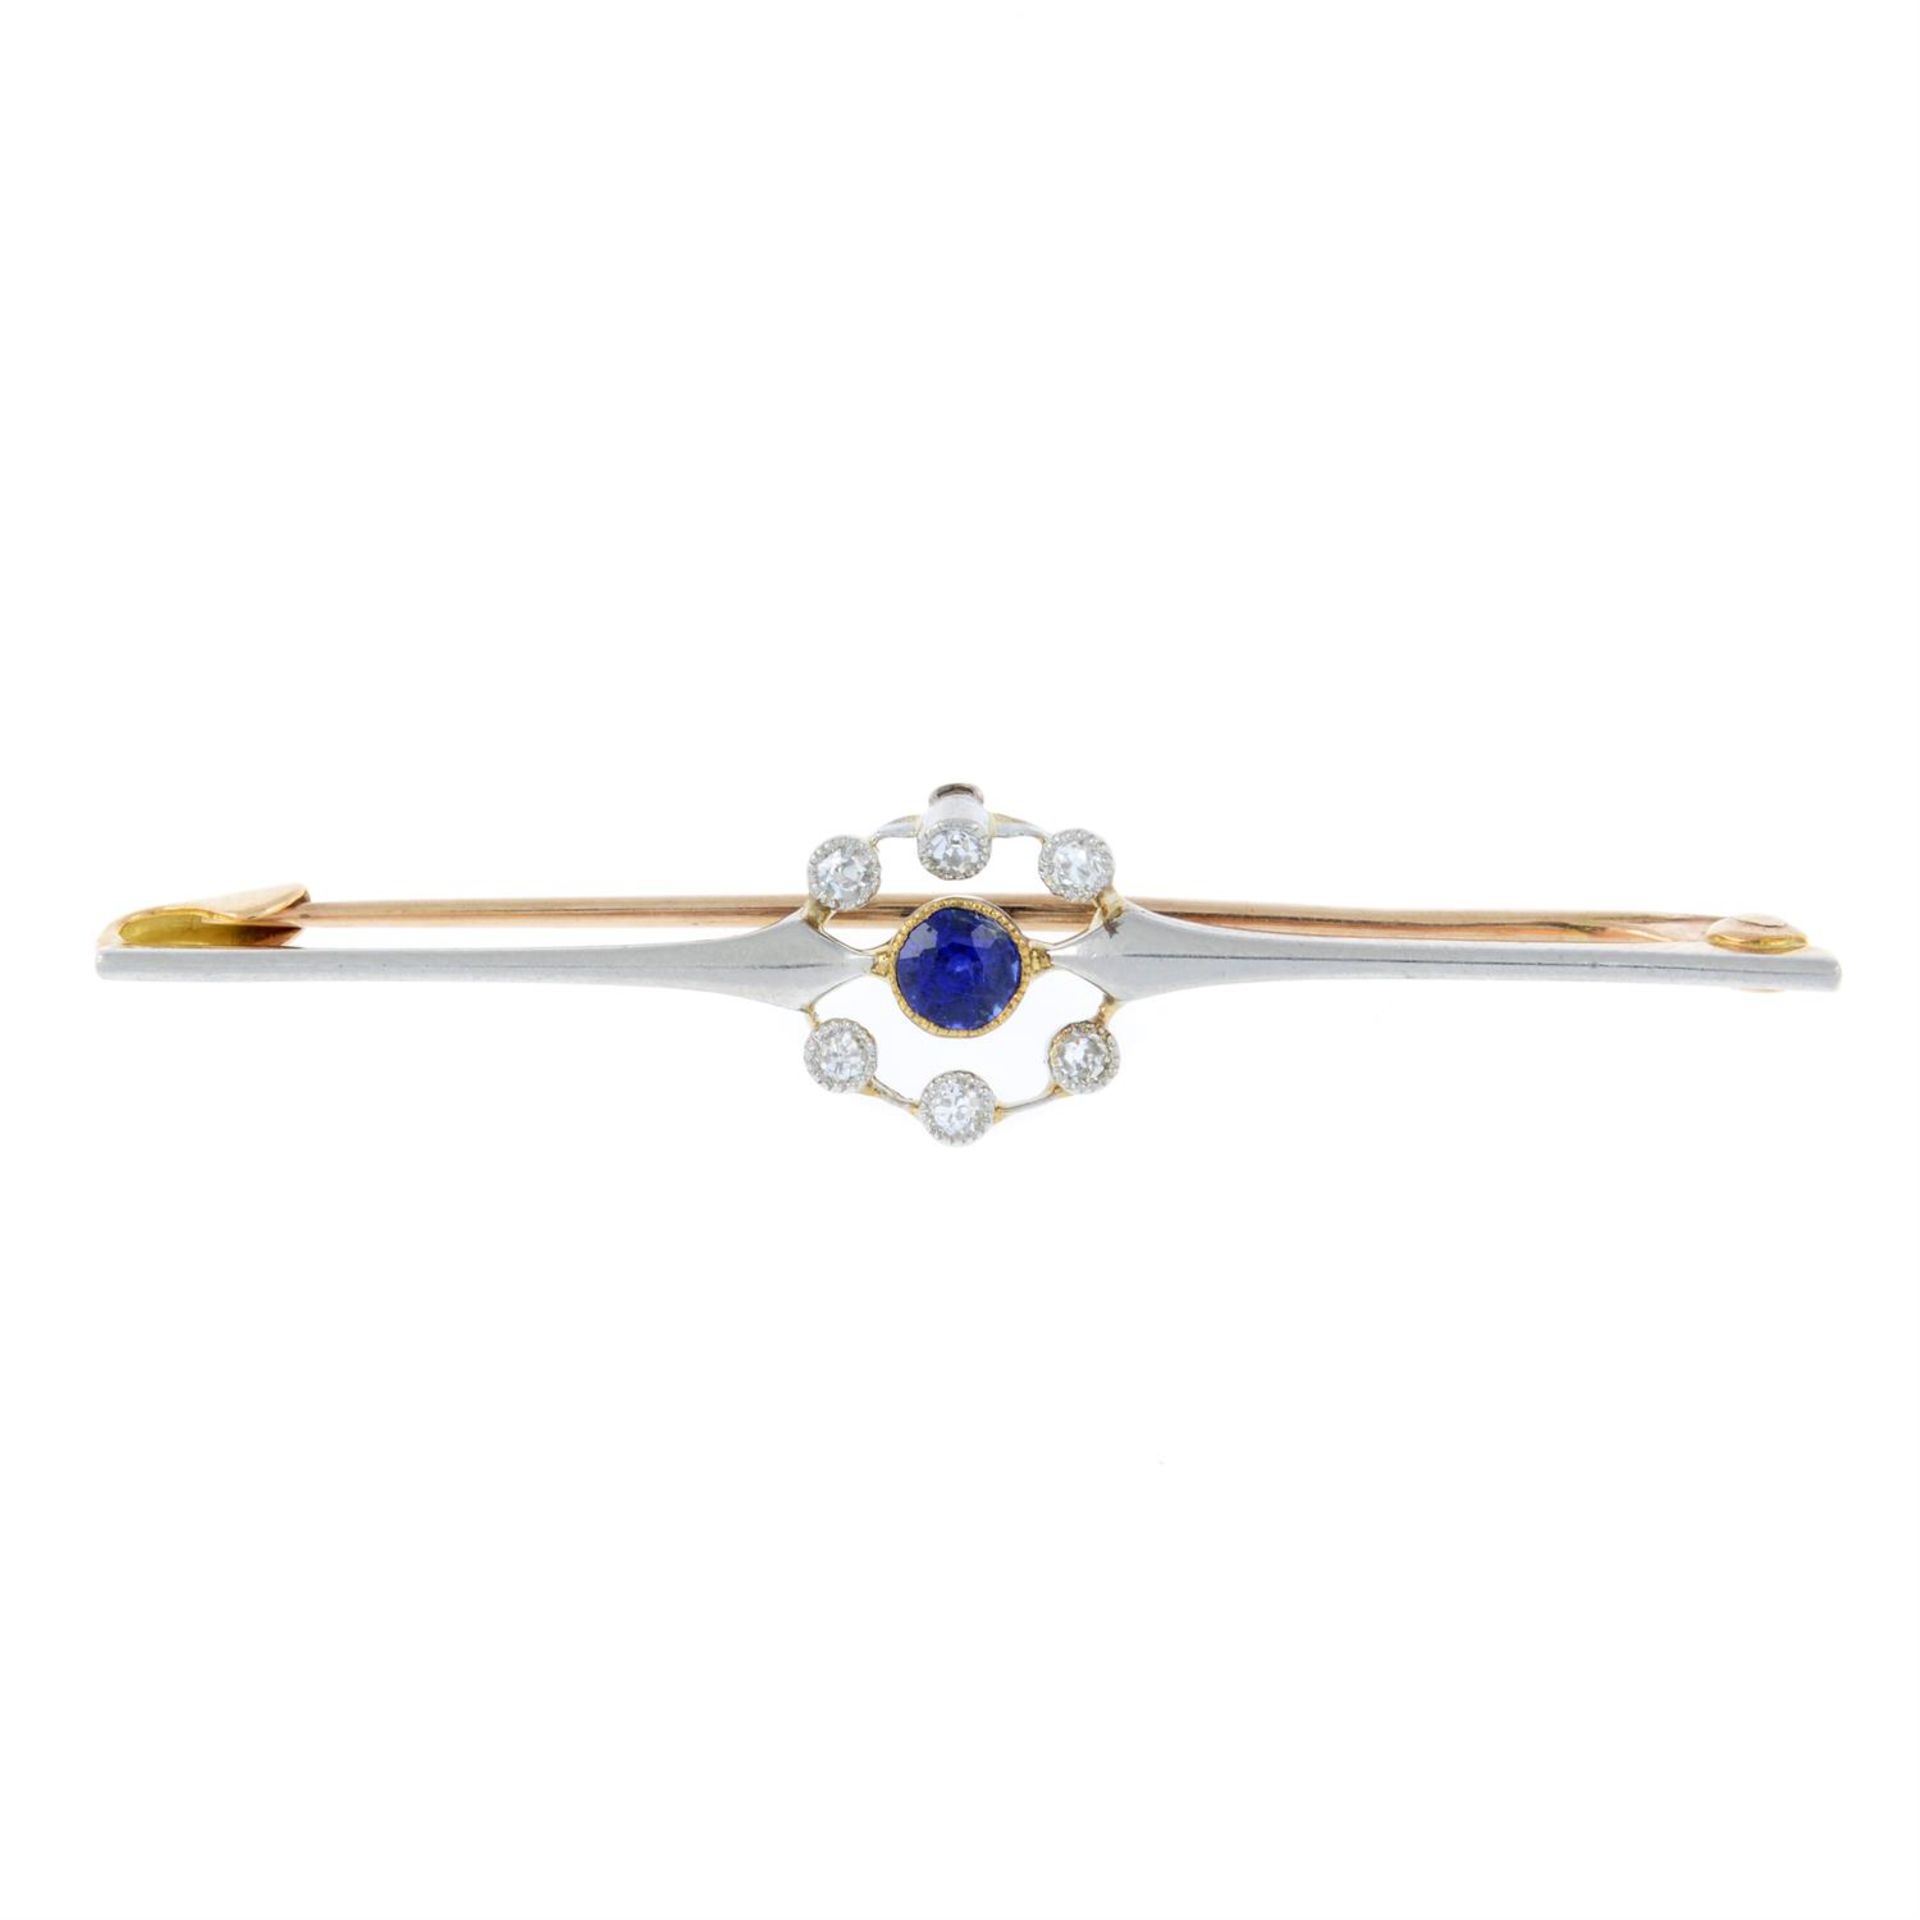 An early 20th platinum and gold, sapphire and diamond bar brooch.